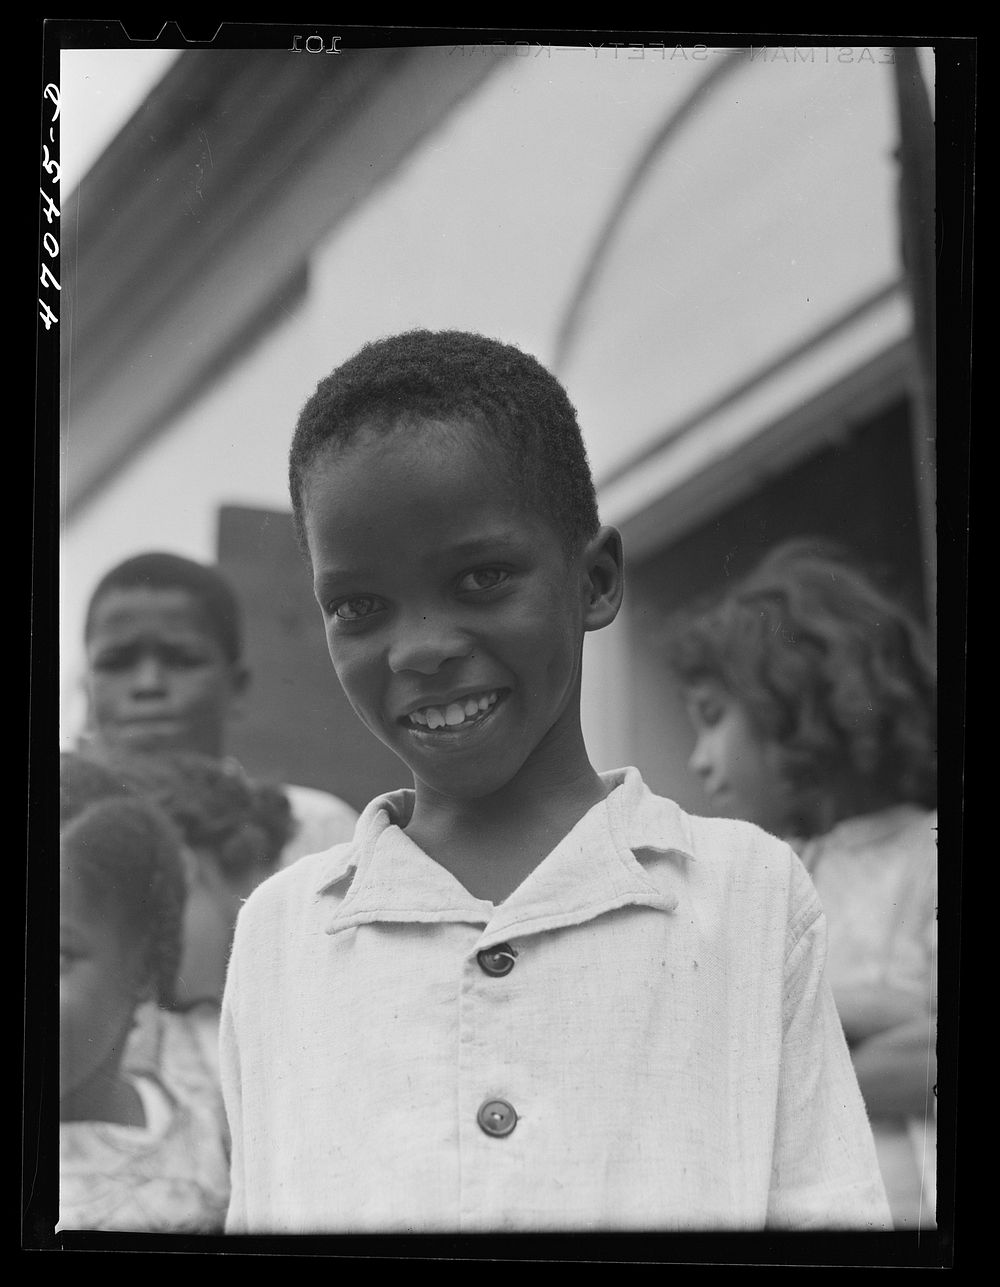 Christiansted, Saint Croix Island, Virgin Islands (vicinity). At an elementary school. Sourced from the Library of Congress.